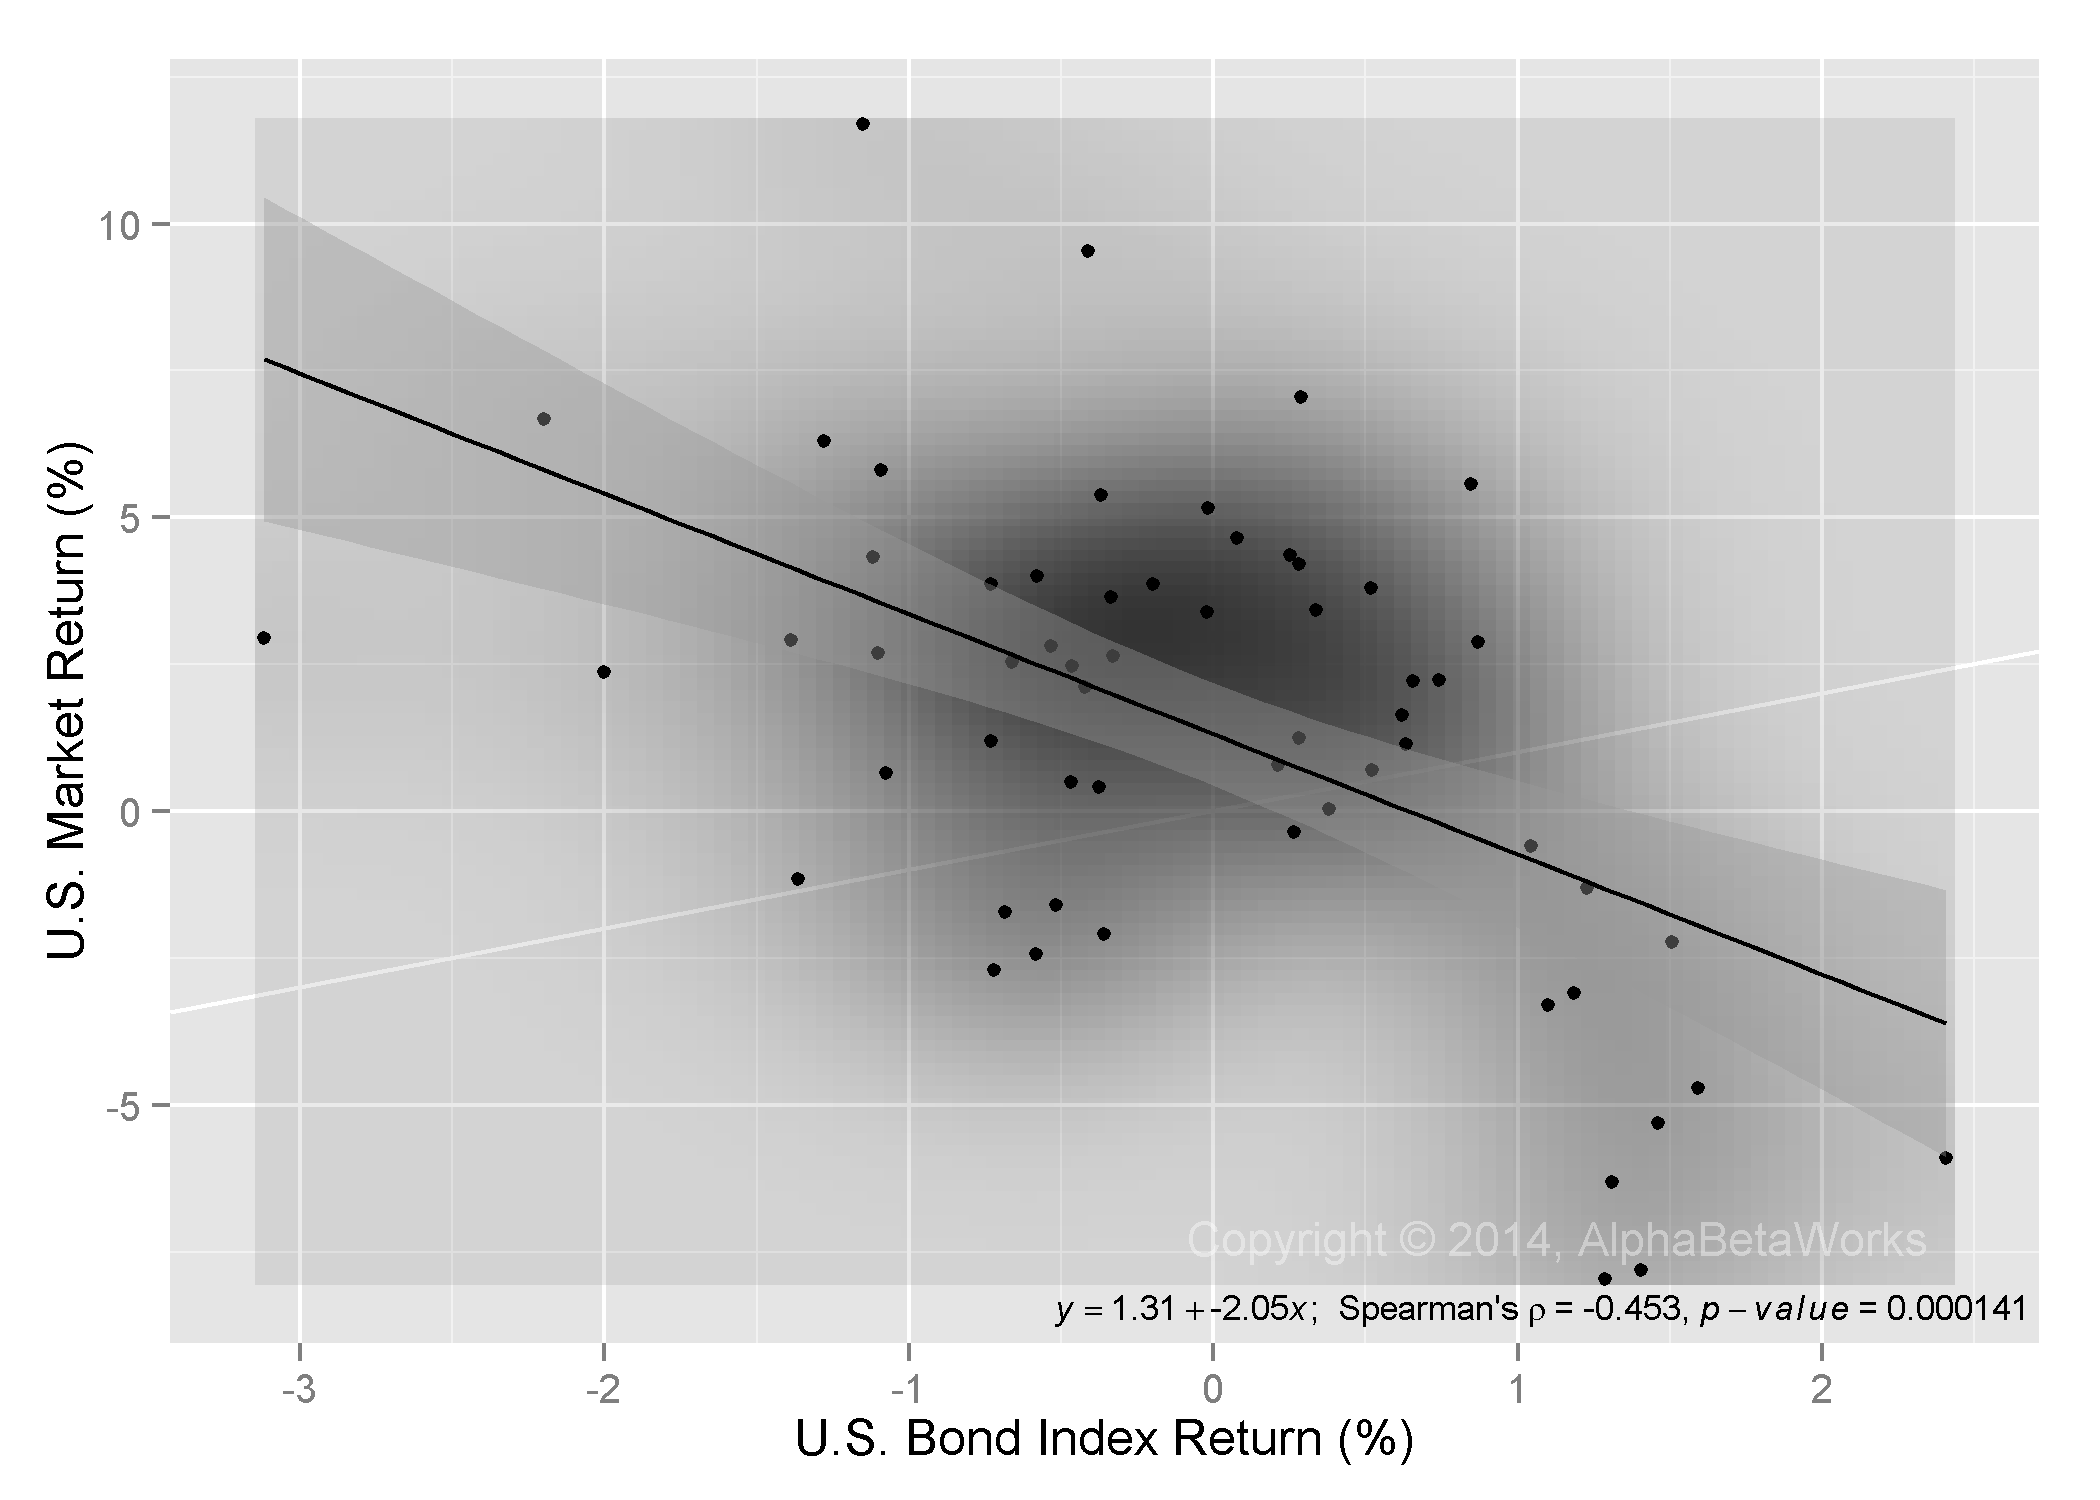 Chart of the Correlation Between U.S. Market Monthly Returns and U.S. Bond Index Monthly Returns for 2009-2014